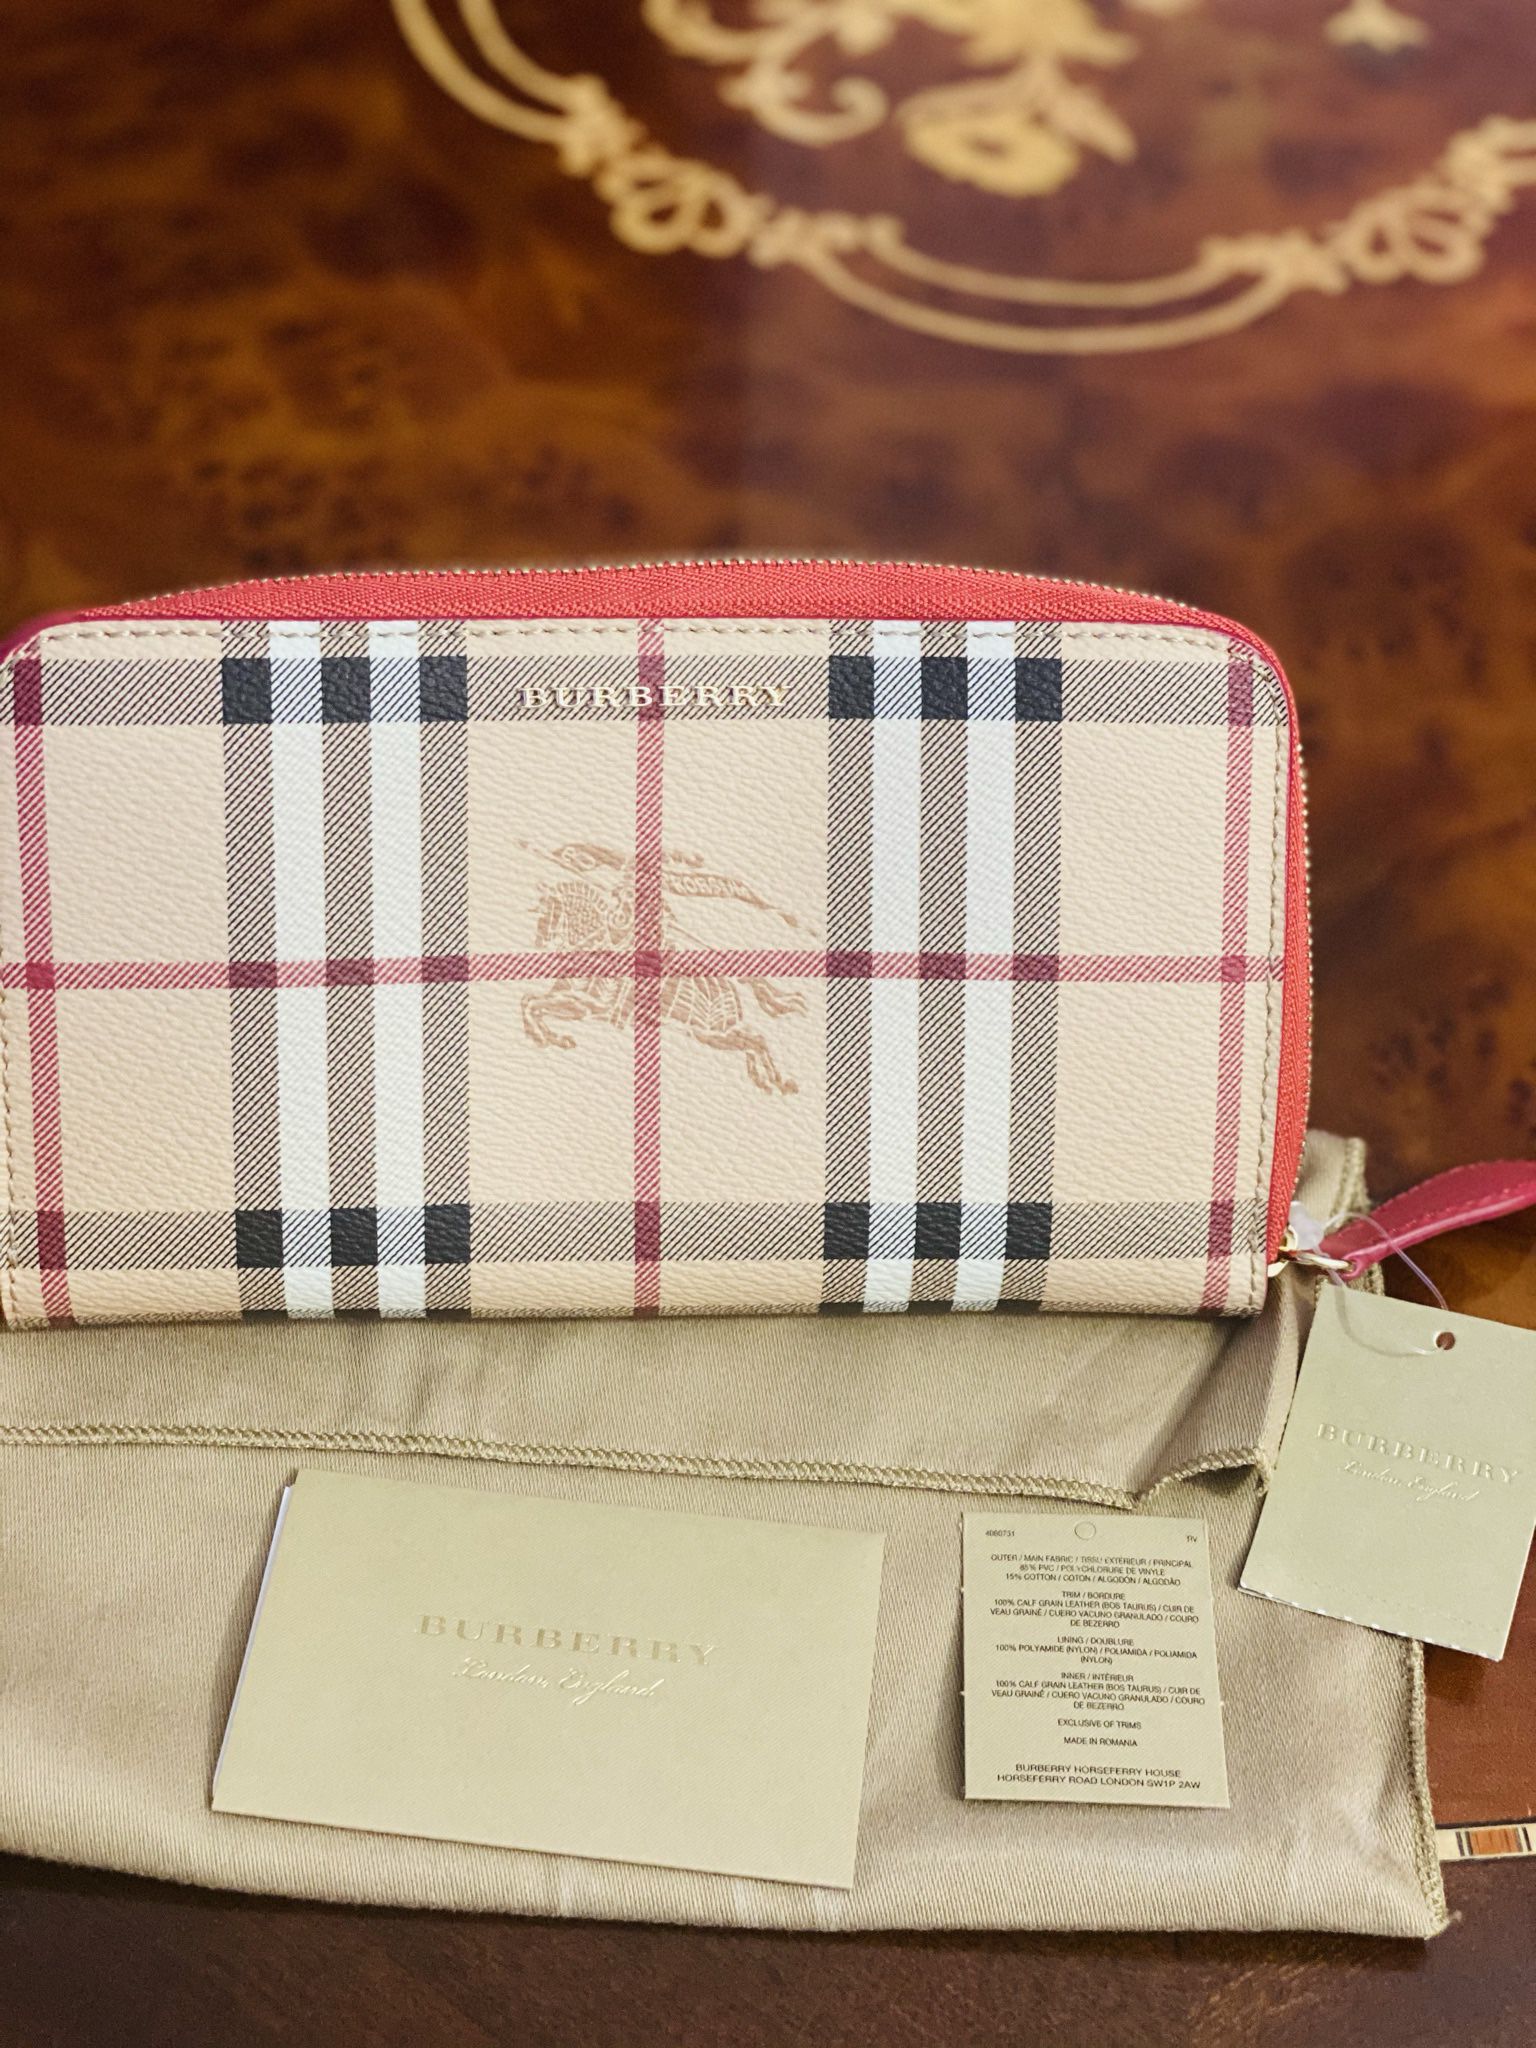 Burberry Authentic Wallet 